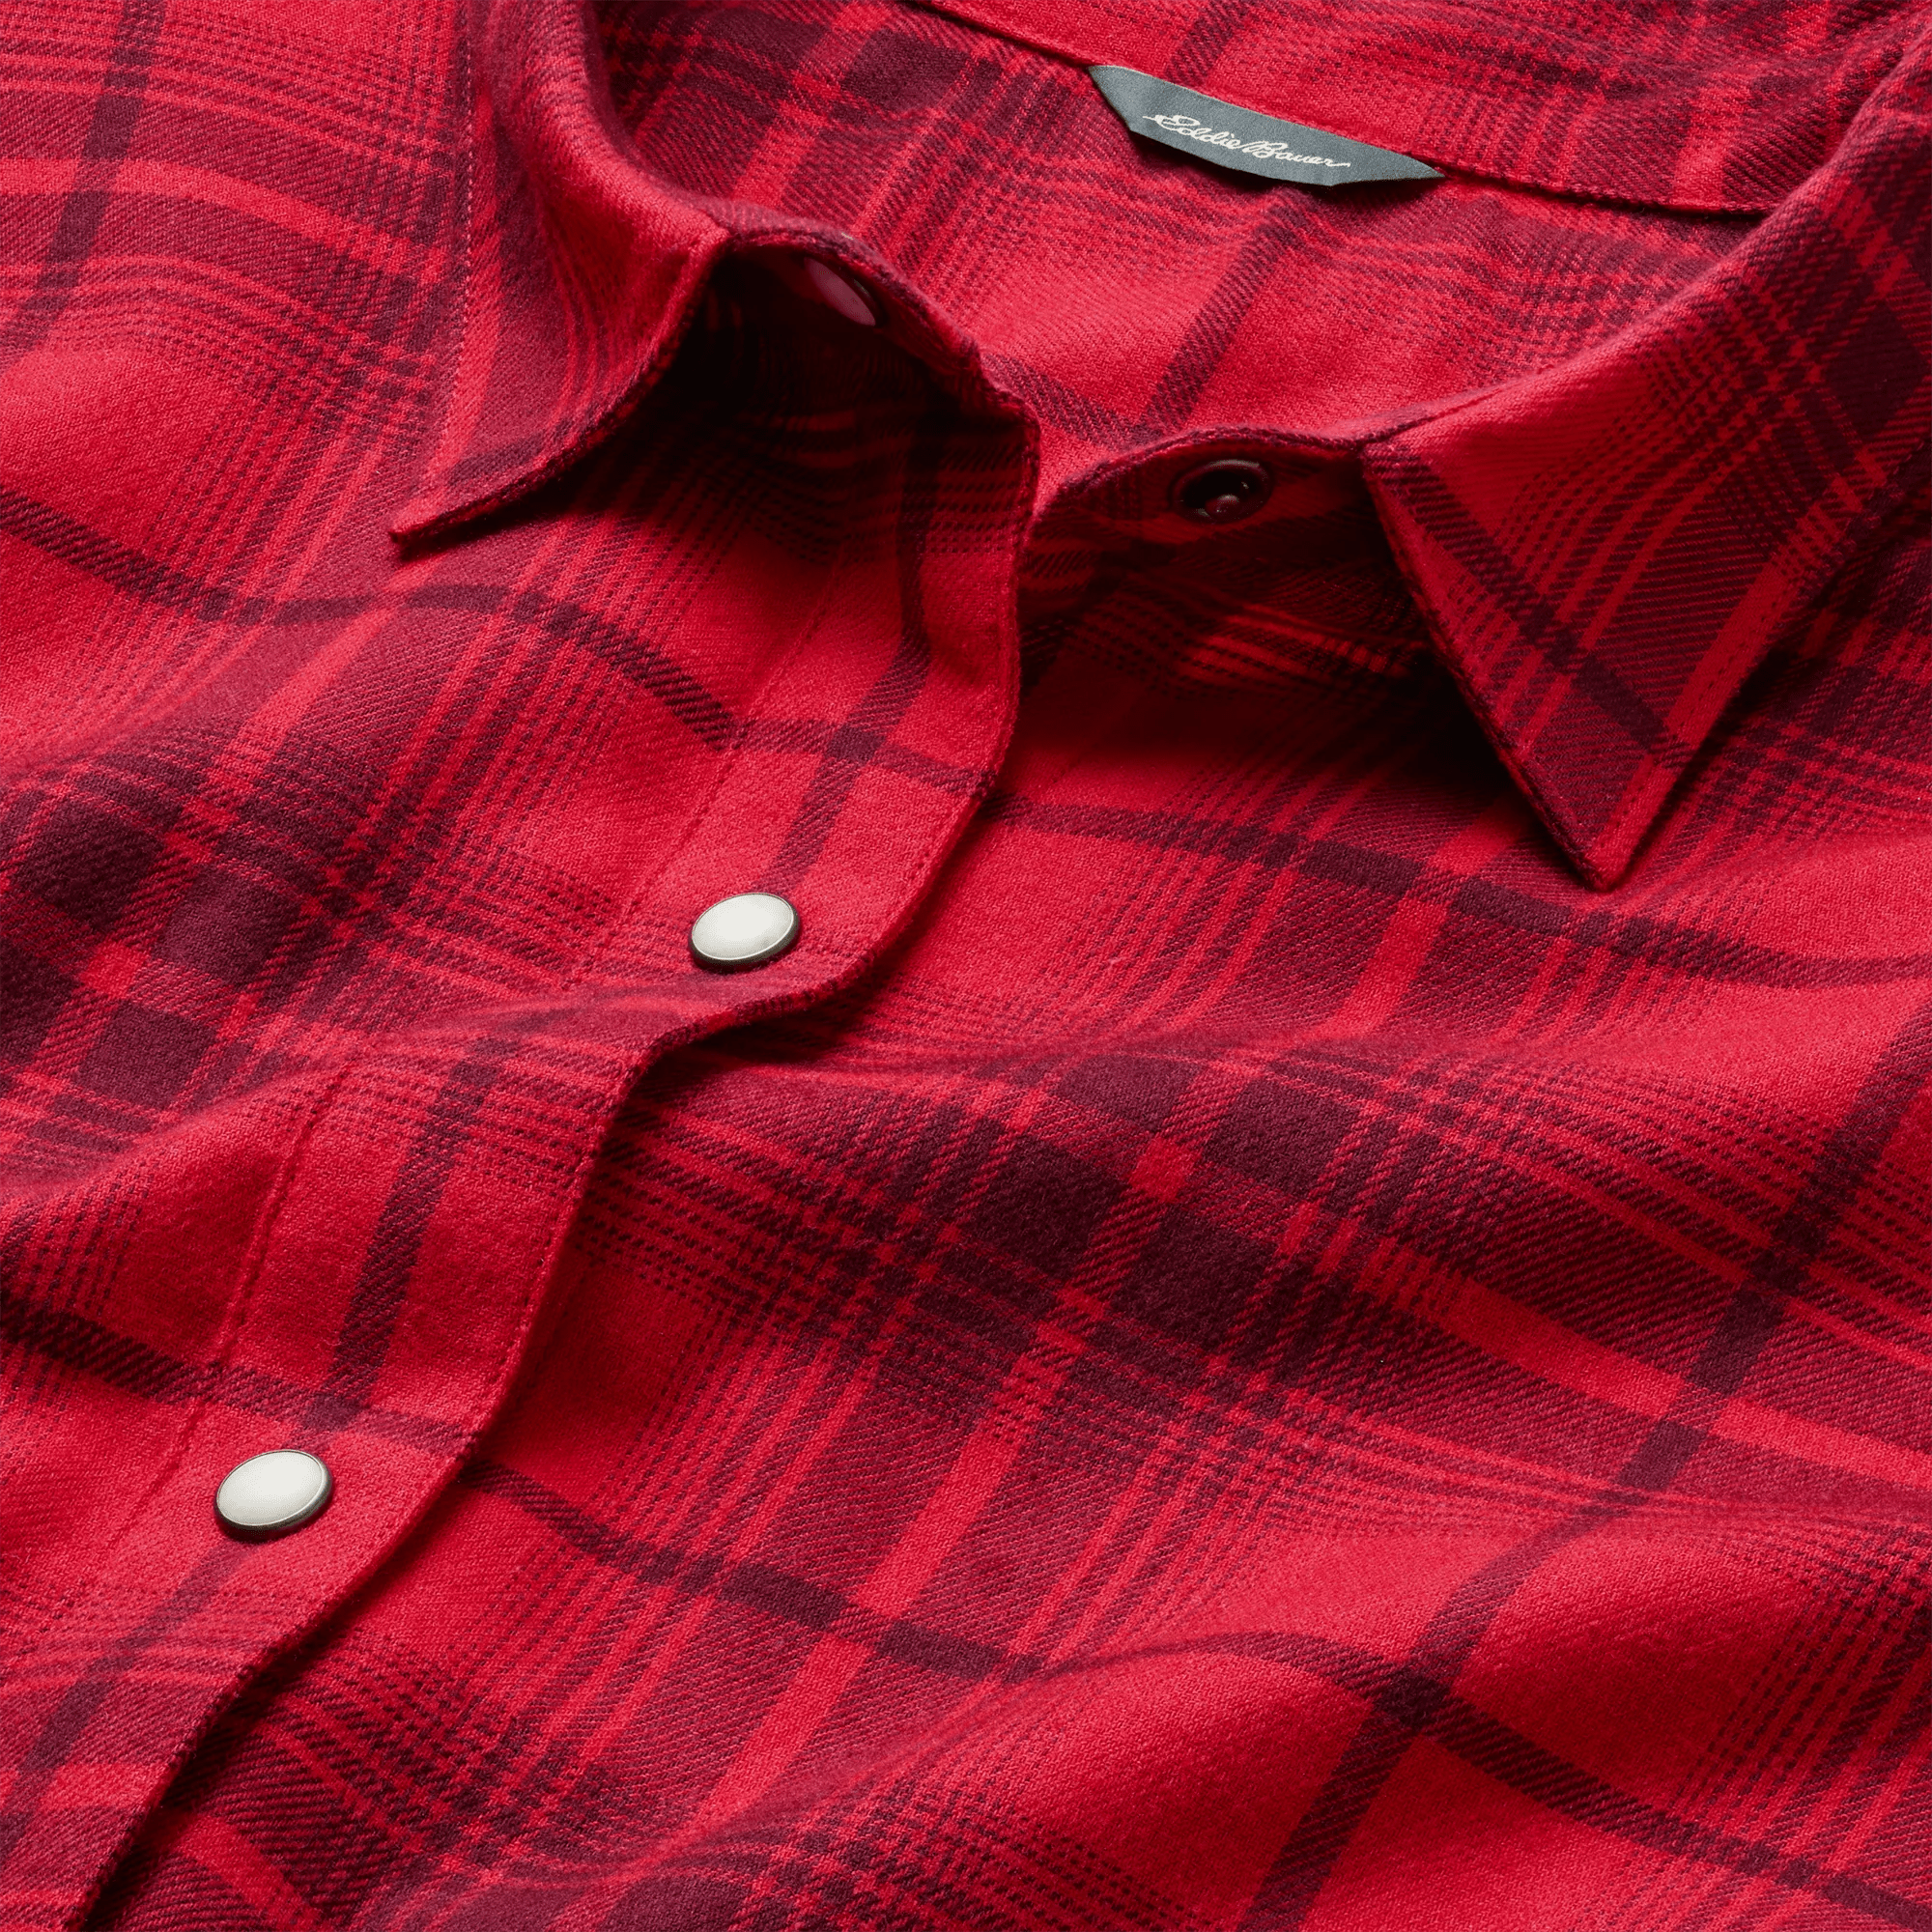 Fremont Snap-Front Flannel Tunic